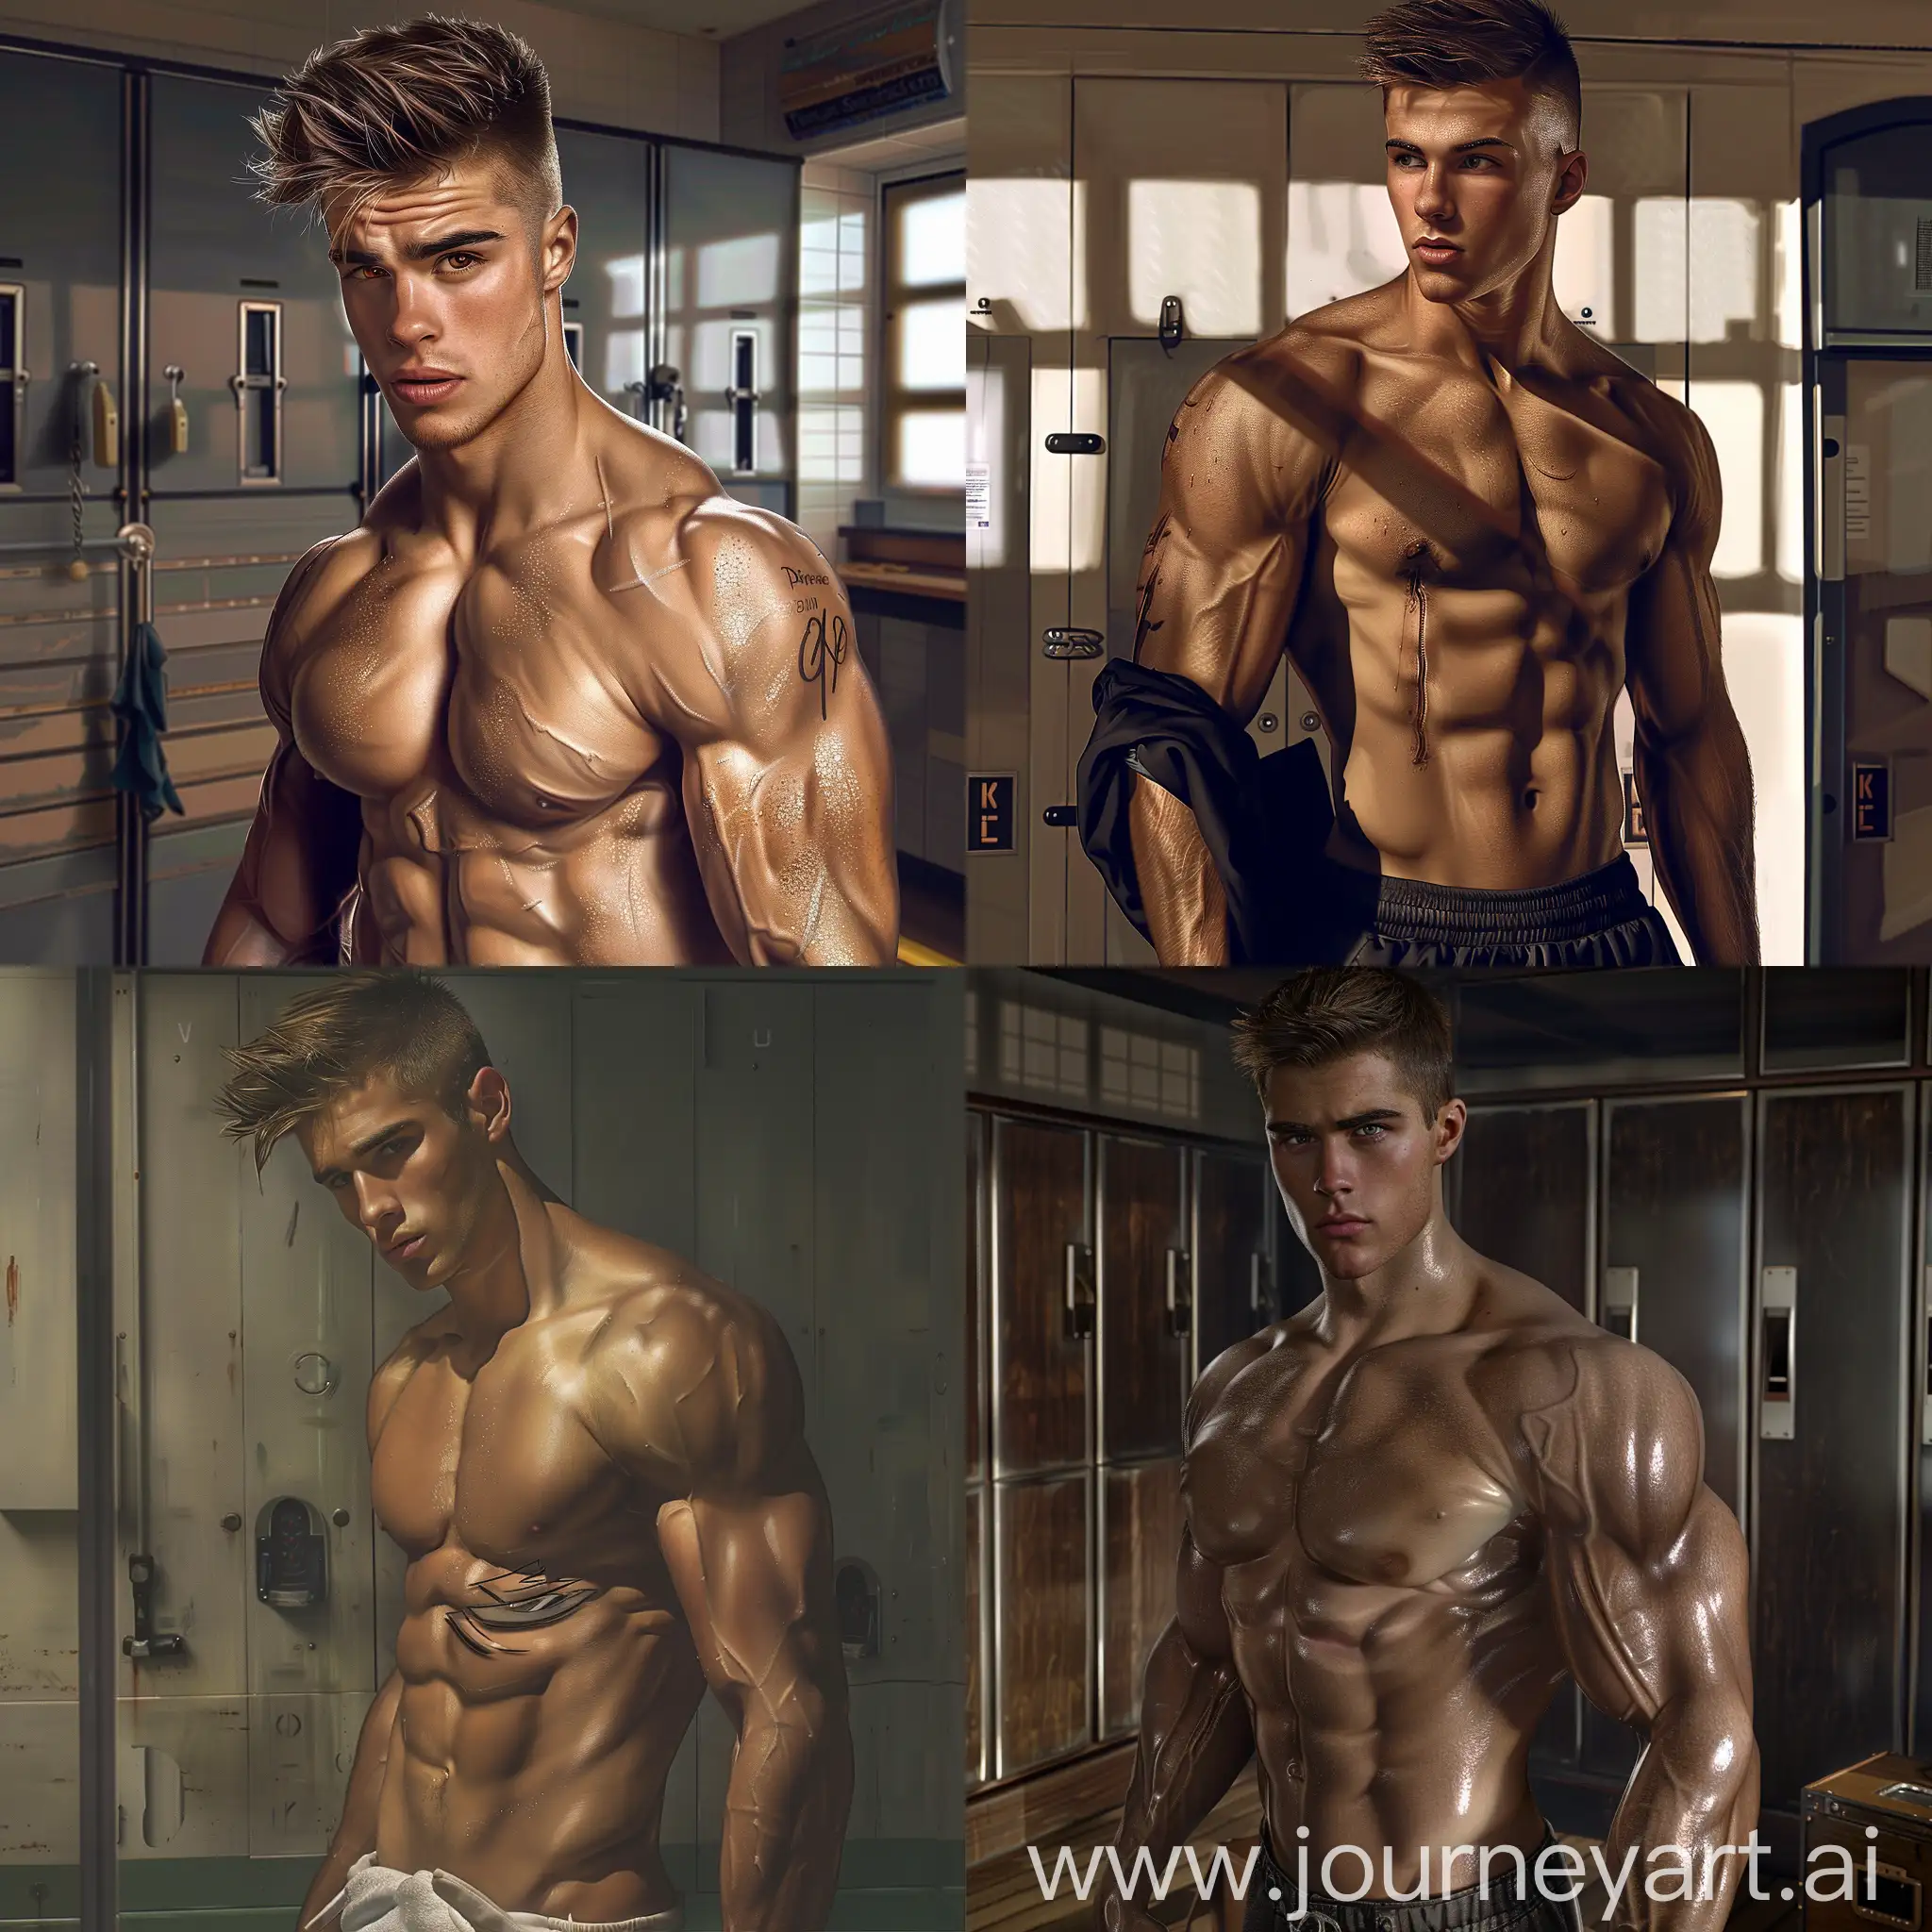  a photorealistic image of a man that resembles Justin-(singer)bieeberposing in a locker room, showcasing his impressive physique